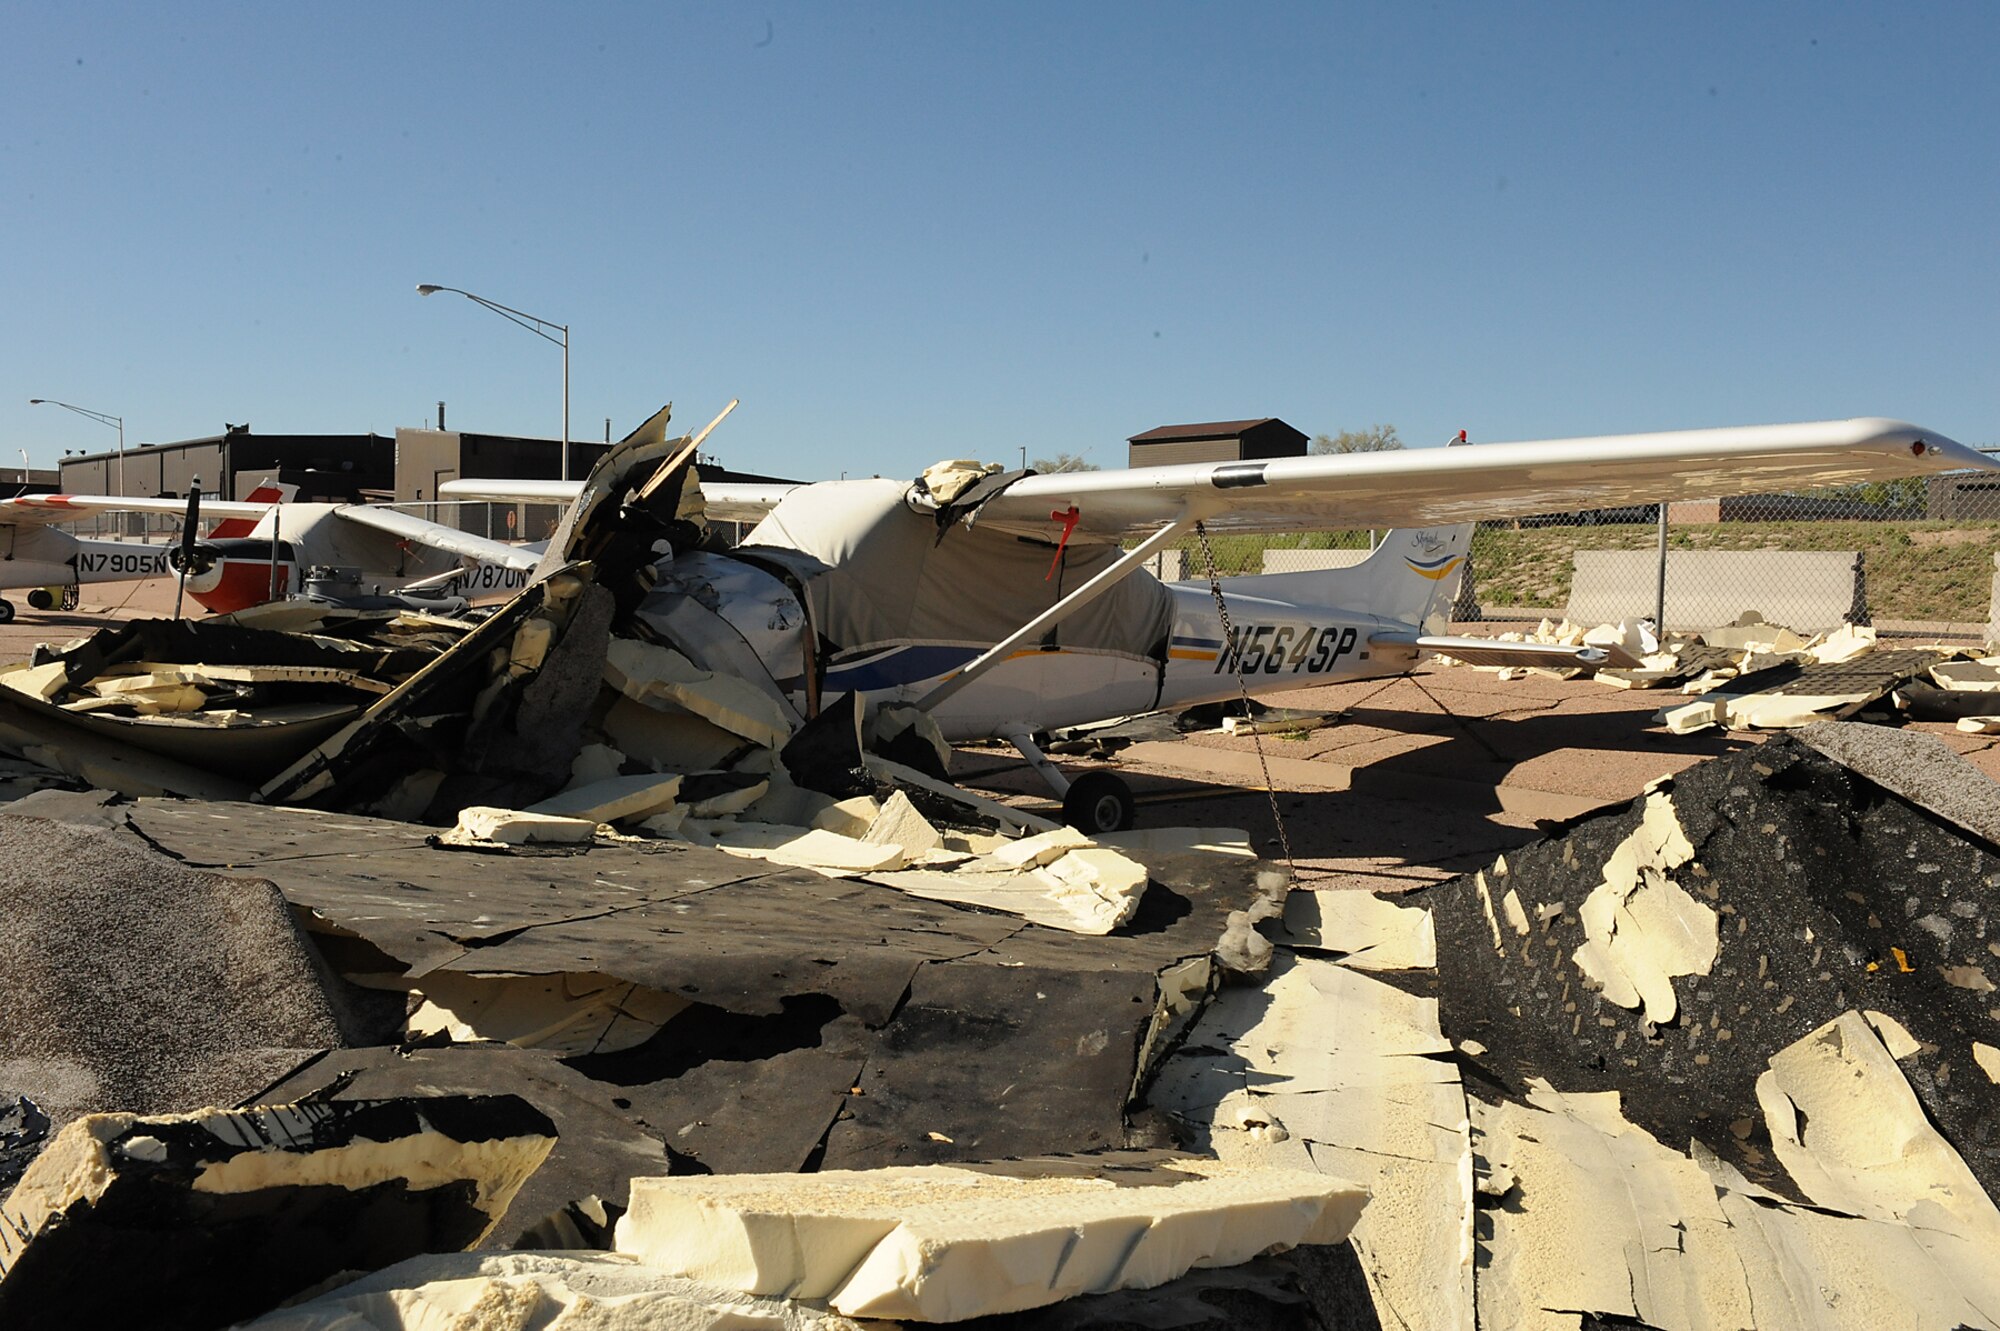 On May 25, 60 mph winds ripped half the roof off Hangar 133 on the Peterson Air Force Base flightline and the debris landed atop two of the Aero Club’s Cessna airplanes. One plane suffered a broken spine, bent engine mounts and wing damage. Club officials expect it to be ruled a total loss by the insurance company. A second aircraft suffered strut and wing damage, but has been repaired and is back in the air. (U.S. Air Force photo/Roberta McDonald) 